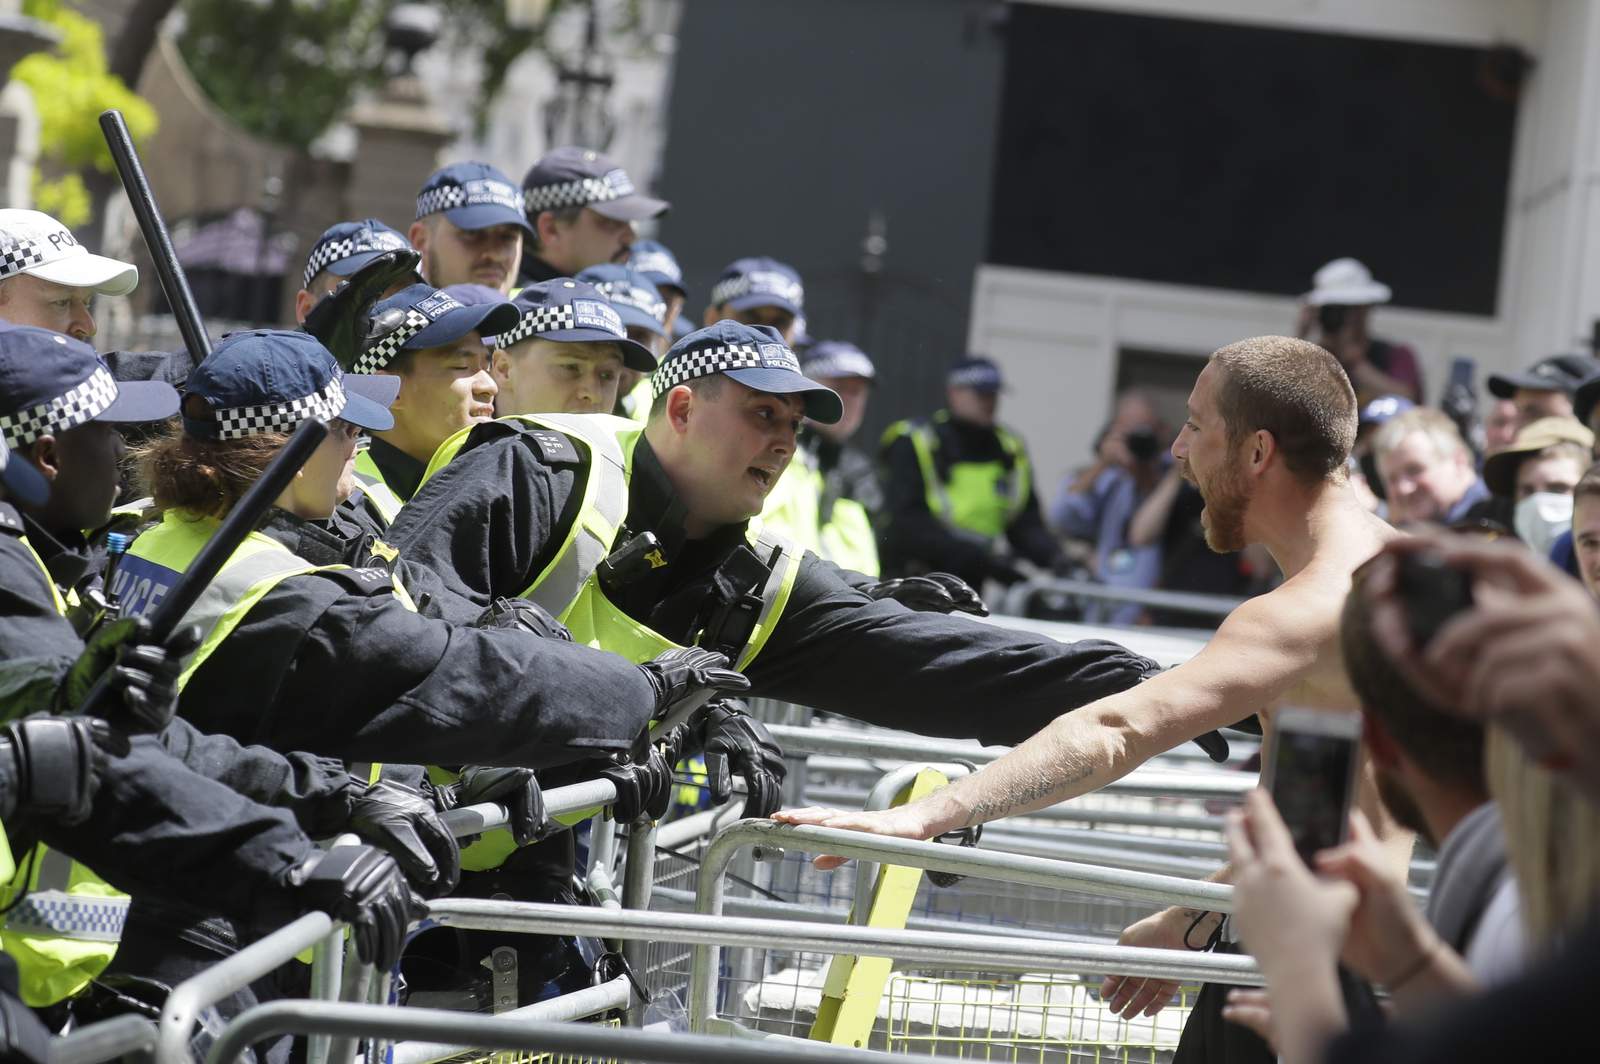 Far-right activists protest in London despite warnings